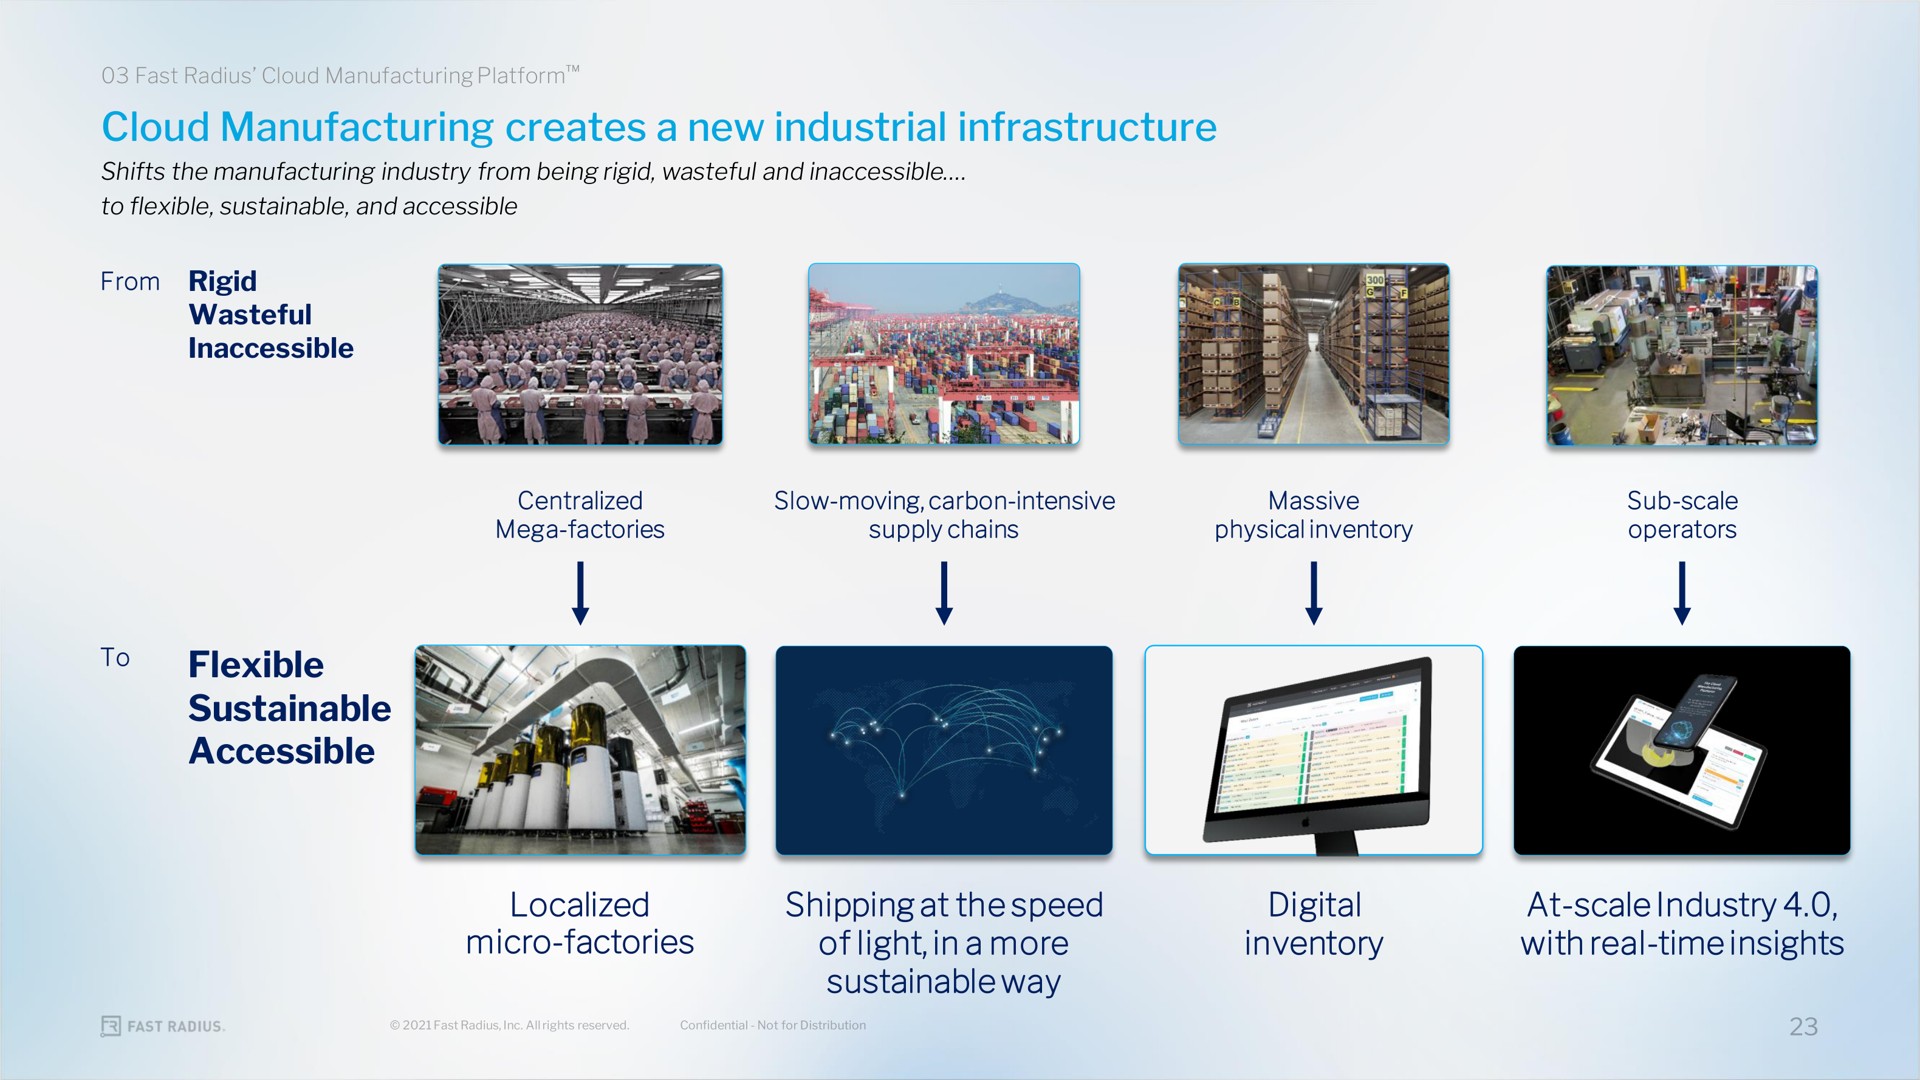 cloud manufacturing creates a new industrial infrastructure flexible sustainable accessible localized micro factories shipping at the speed of light in a more sustainable way digital inventory at scale industry with real time insights to | Fast Radius